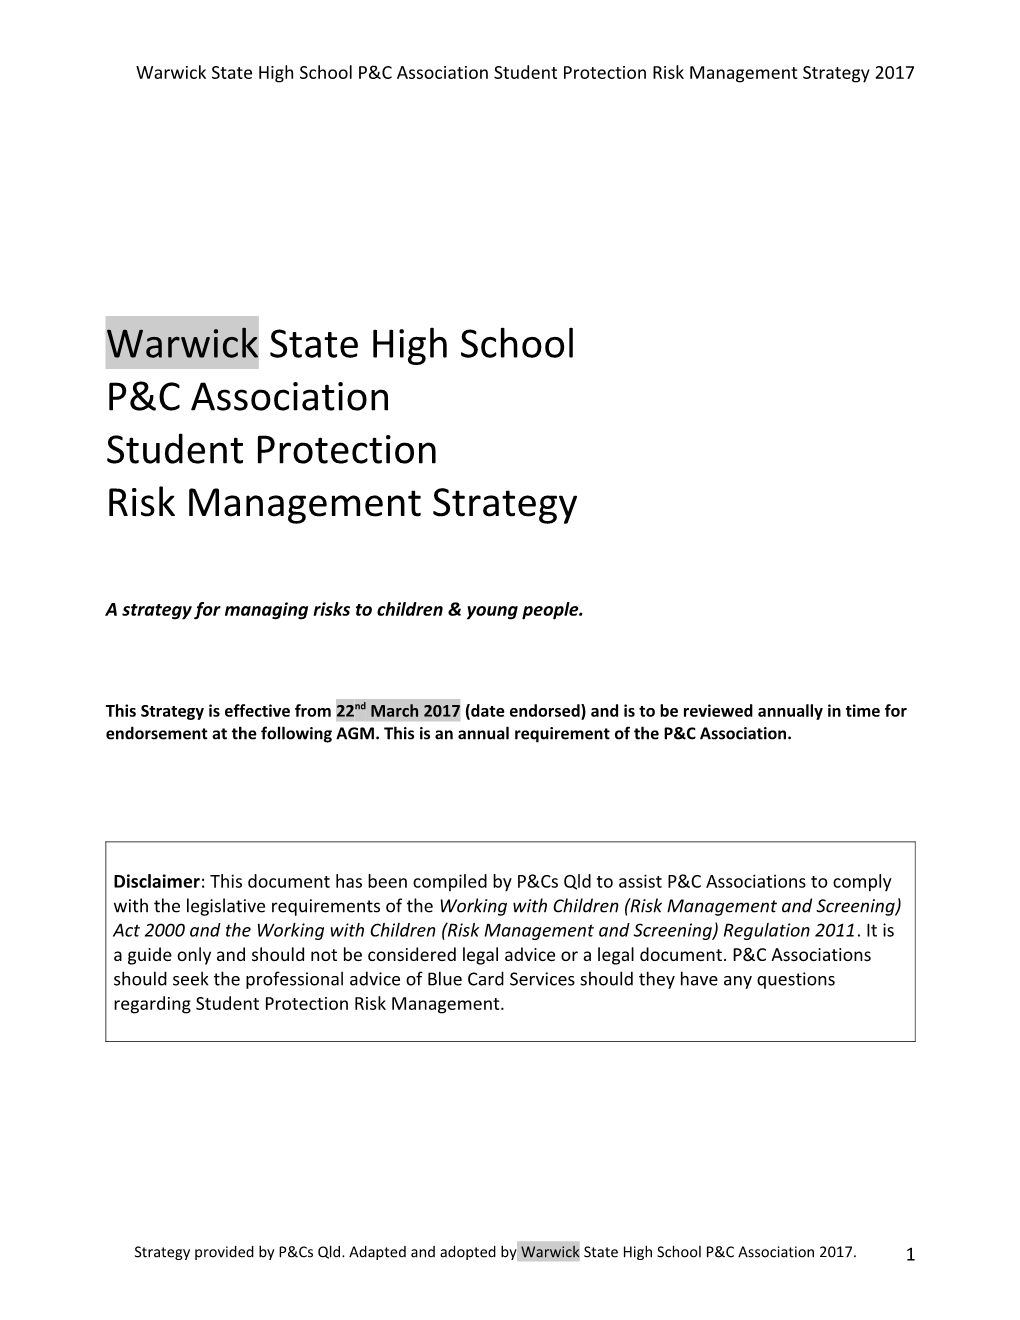 Student Risk Management Strategy